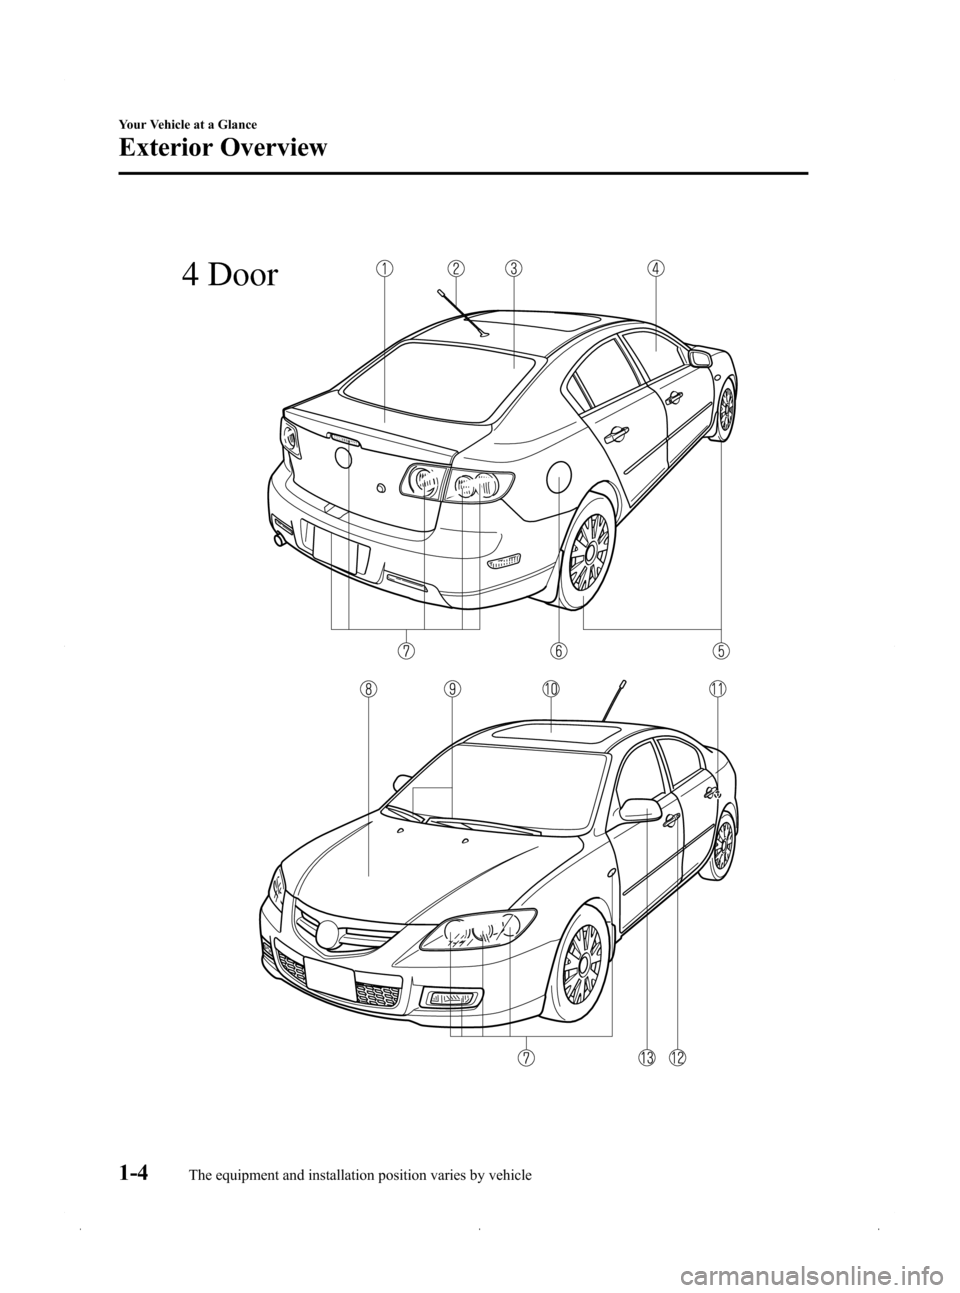 MAZDA MODEL 3 HATCHBACK 2009  Owners Manual (in English) Black plate (10,1)
4 Door
1-4
Your Vehicle at a Glance
The equipment and installation position varies by vehicle
Exterior Overview
Mazda3_8Z87-EA-08F_Edition1 Page10
Monday, May 19 2008 9:55 AM
Form N